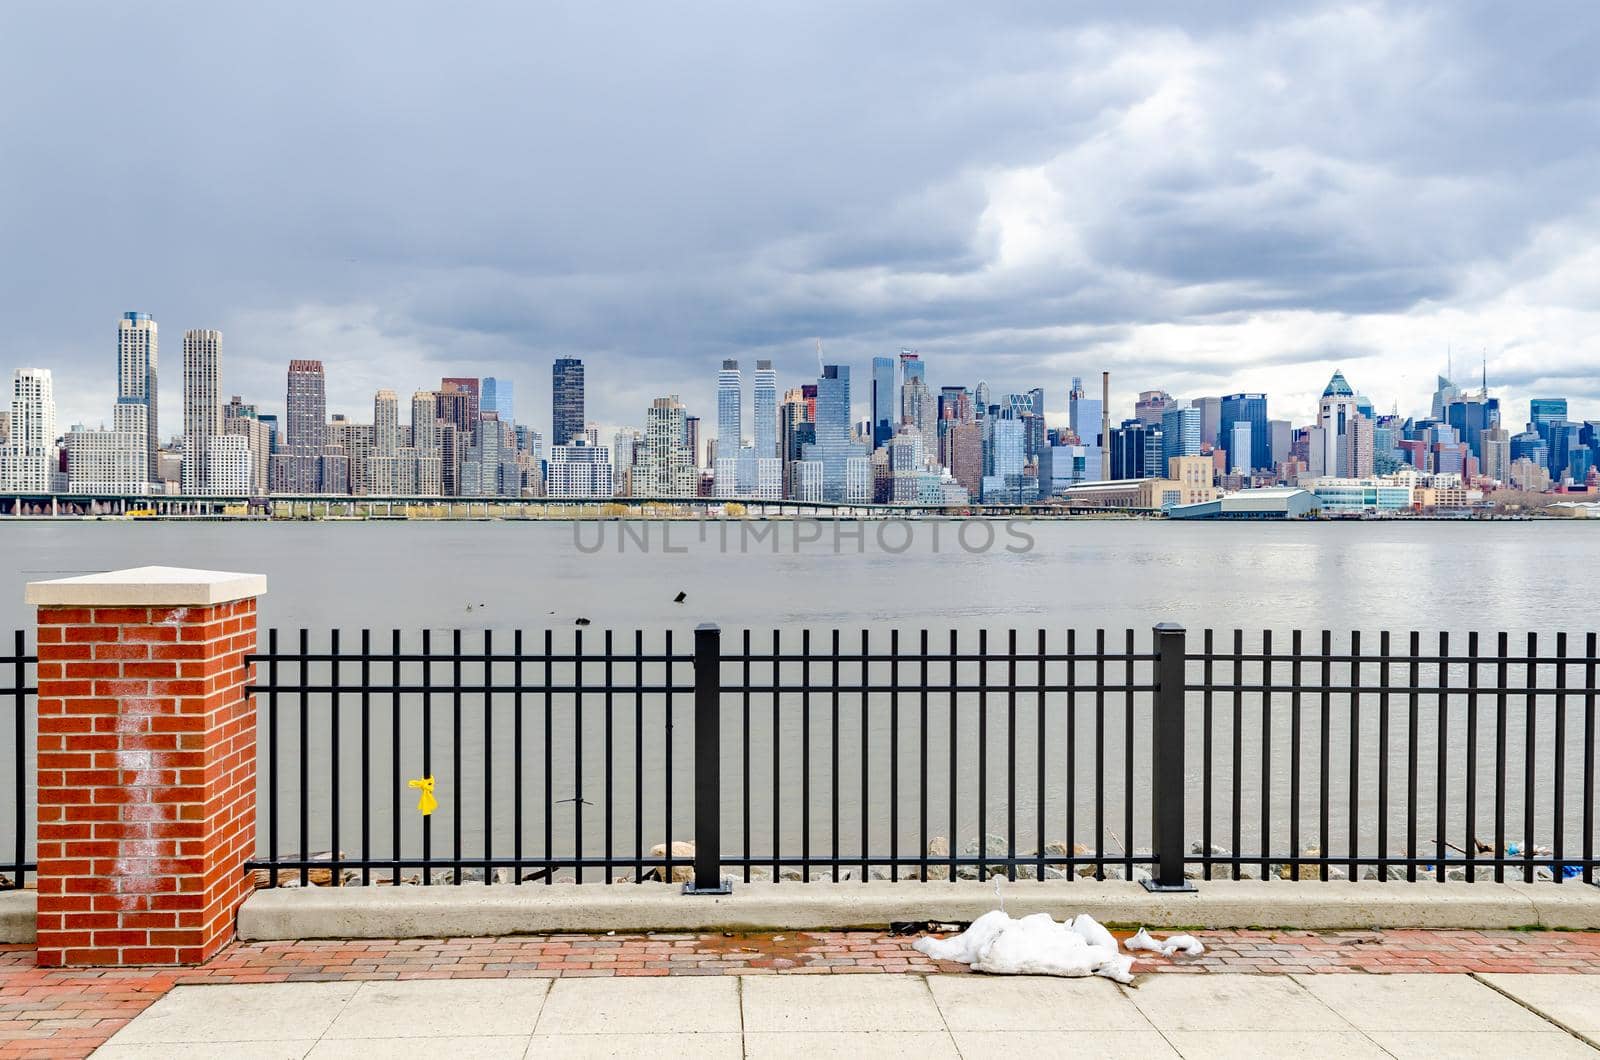 View of Manhattan from the Other side of Hudson River with fence in front, New Jersey during cloudy winter day, snow on the ground, horizontal